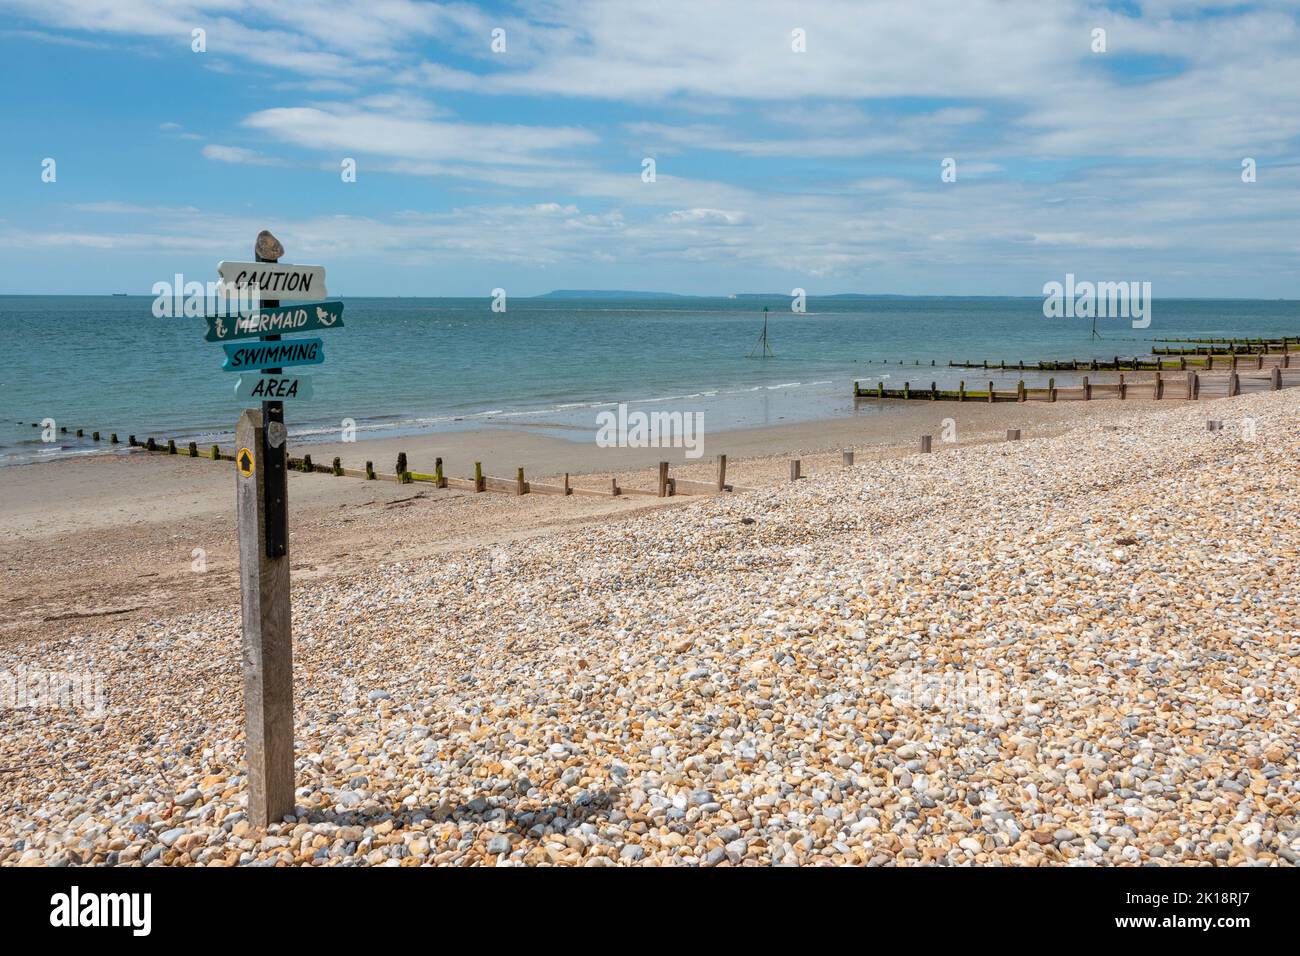 Caution Mermaid swimming area sign on beautiful deserted beach at Selsey West Sussex England Stock Photo